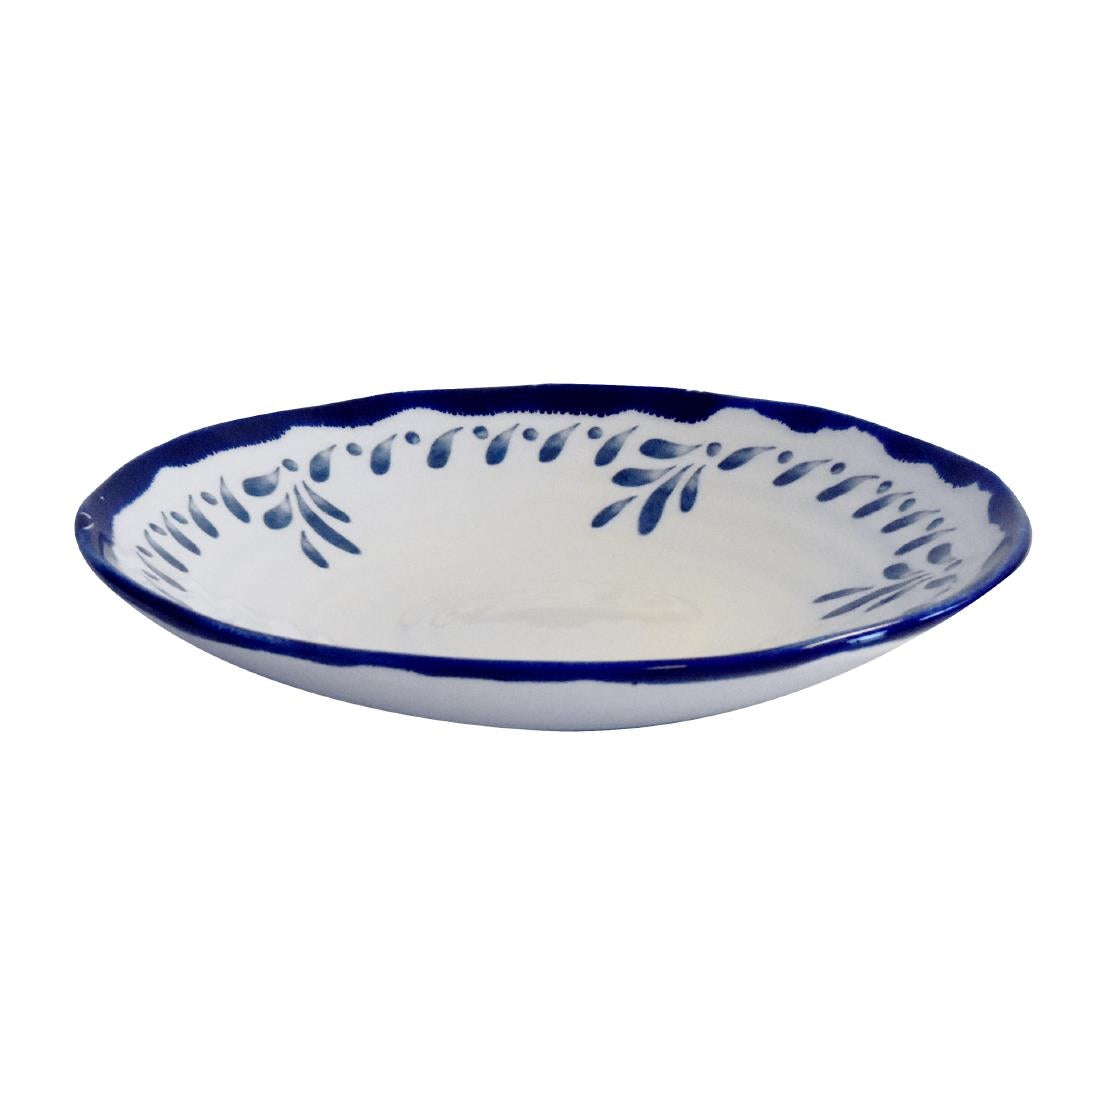 CU042 Dudson Harvest Mediterranean Organic Coupe Bowl 9.6 inch Box 12 JD Catering Equipment Solutions Ltd